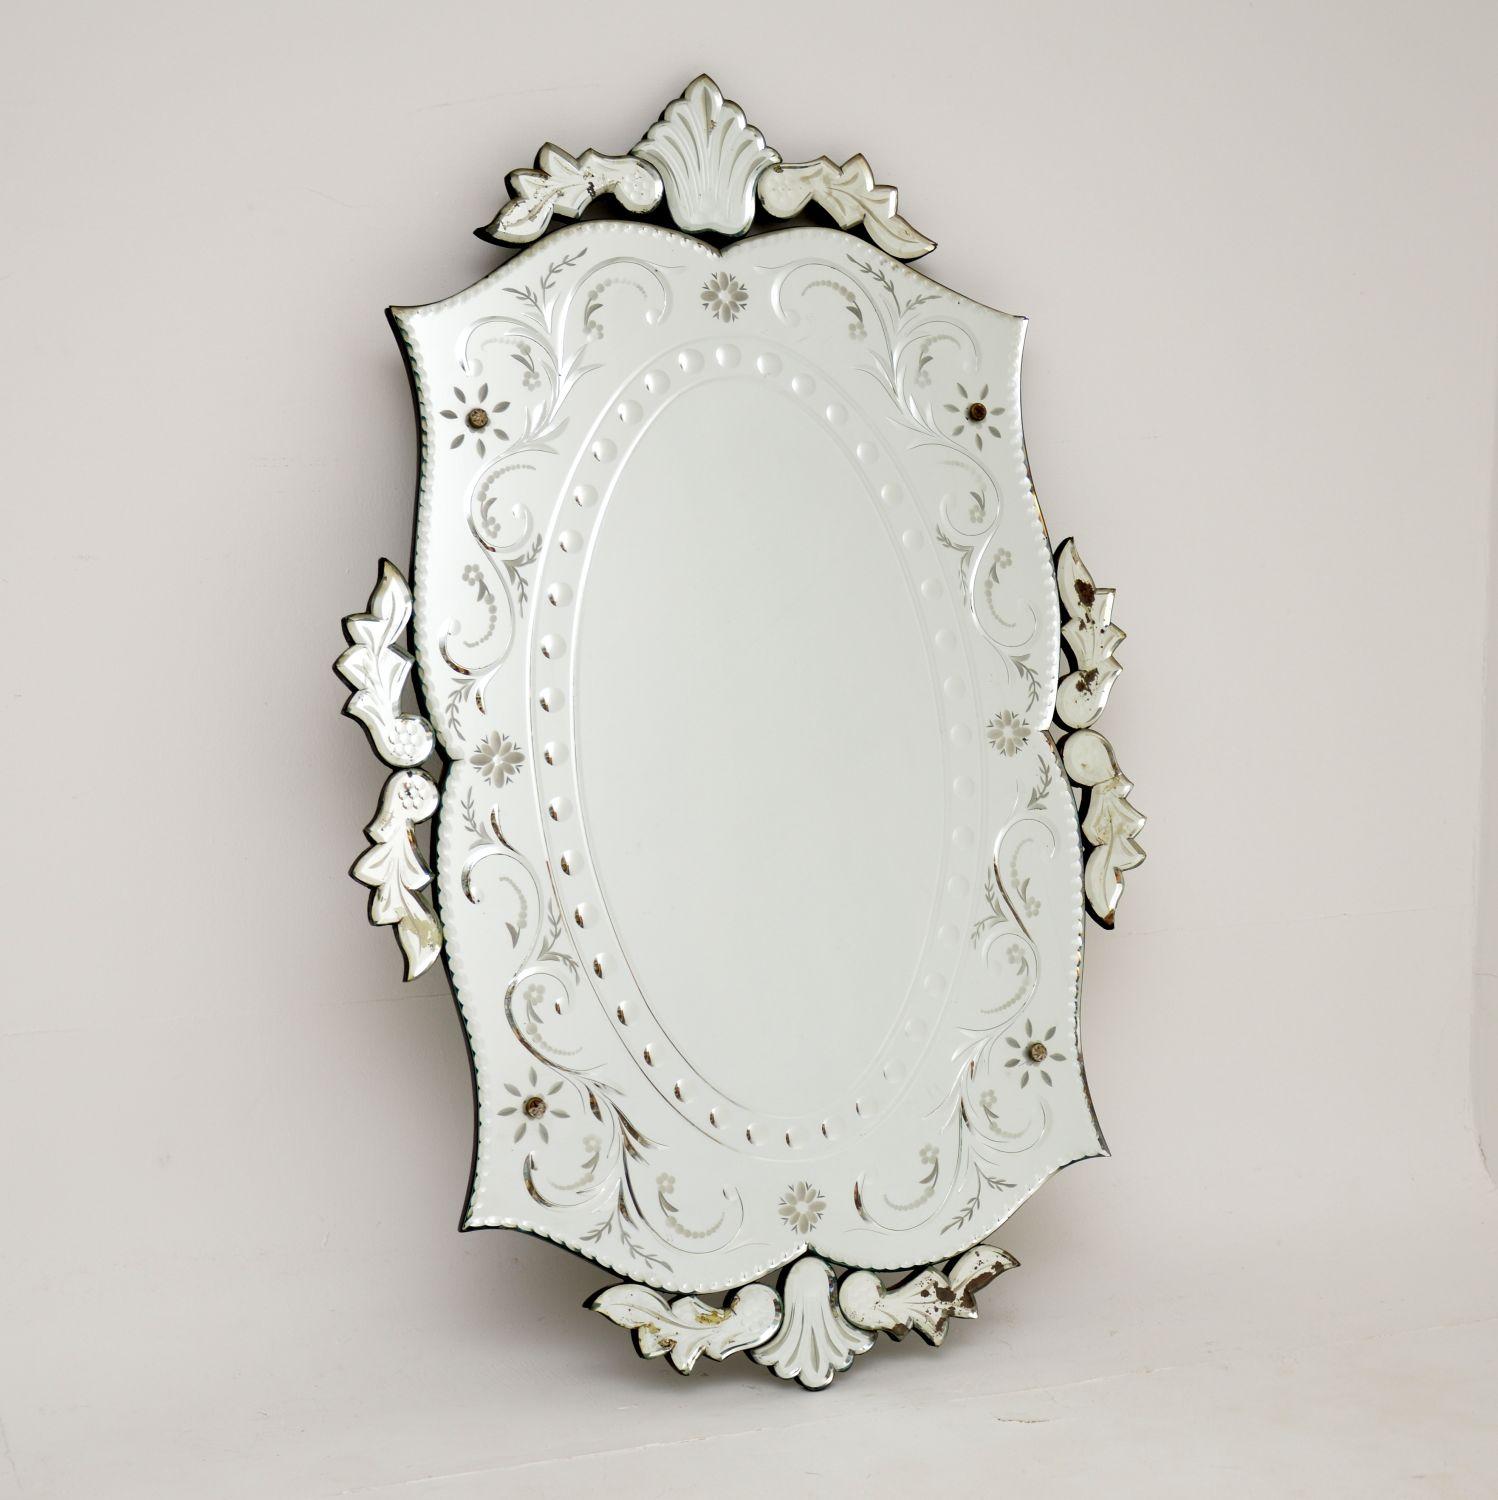 A stunning antique Italian Venetian etched decorative mirror, dating from around the 1890-1910 period.
The quality is excellent, this is beautifully made with a gorgeous design. There are wonderful etched patterns and this has added decorative